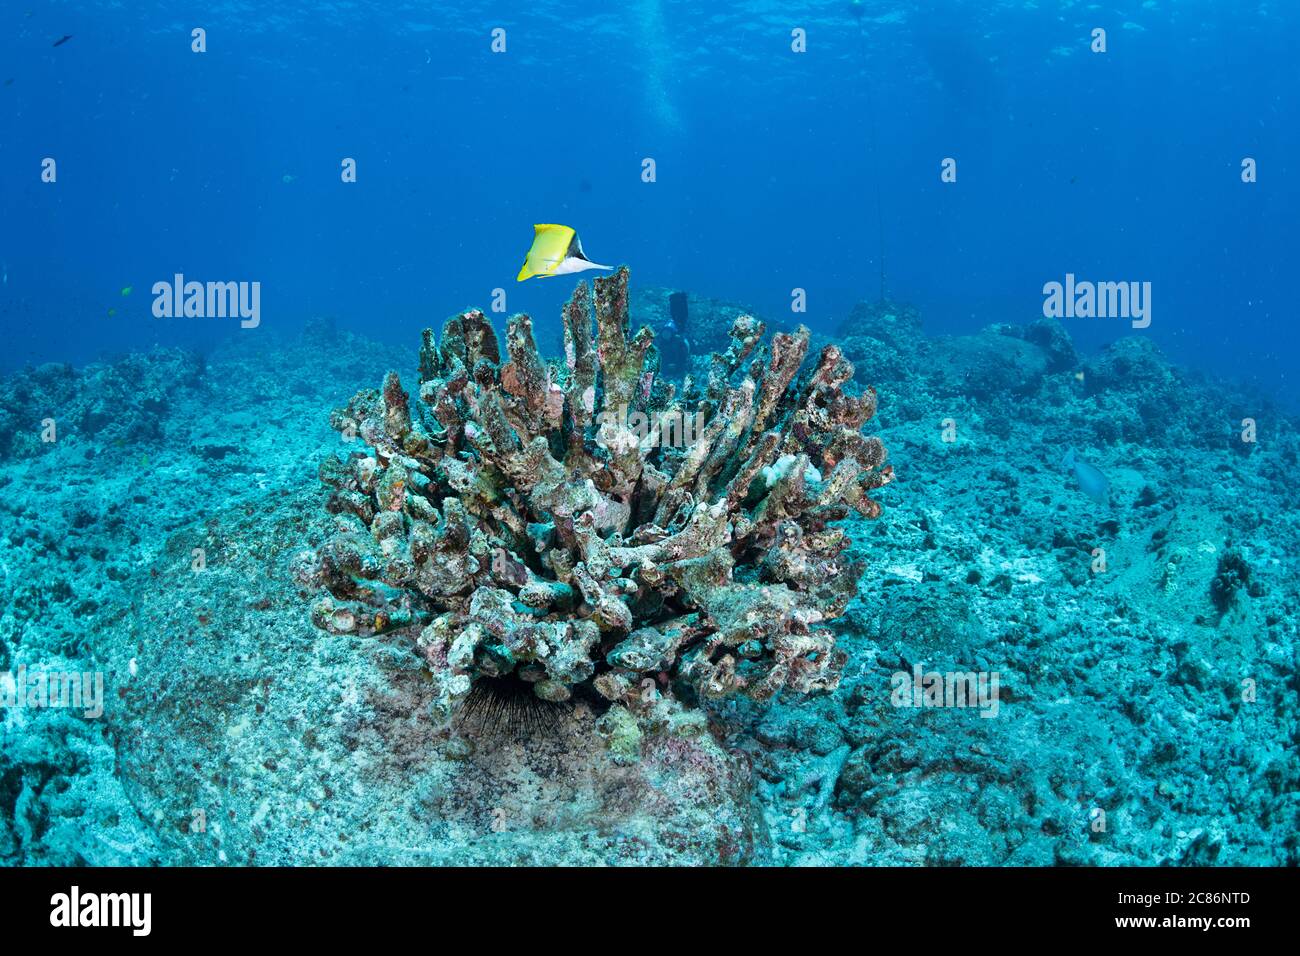 a longnose butterflyfish, Forcipiger longirostris, forages in the algae growing on the skeleton of an antler coral, Pocillopora grandis, that bleached Stock Photo